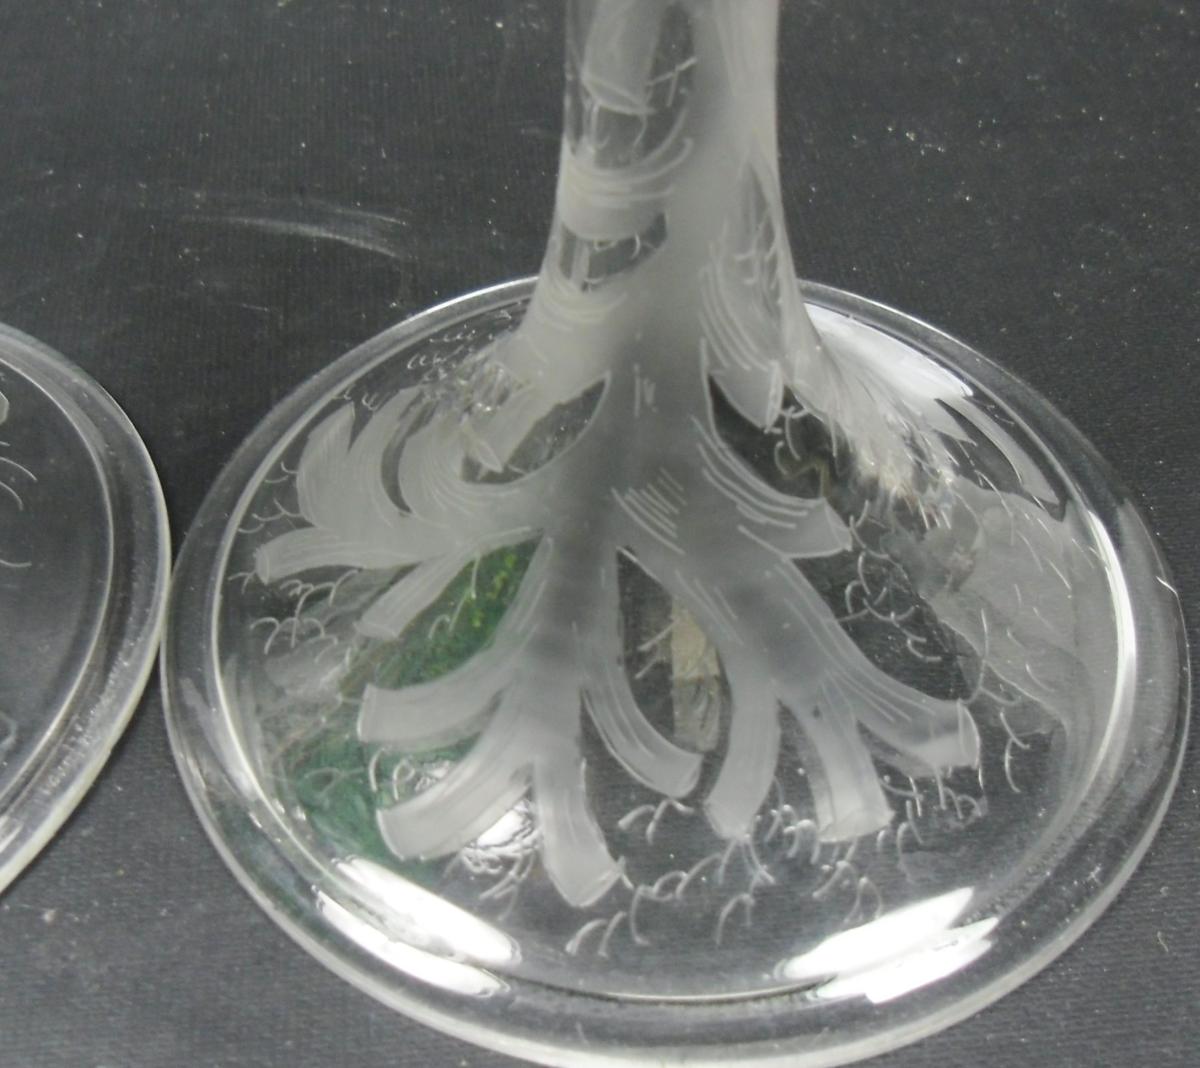 Pair of crystal French Ale glasses etched with aquatic scenes, circa 1870